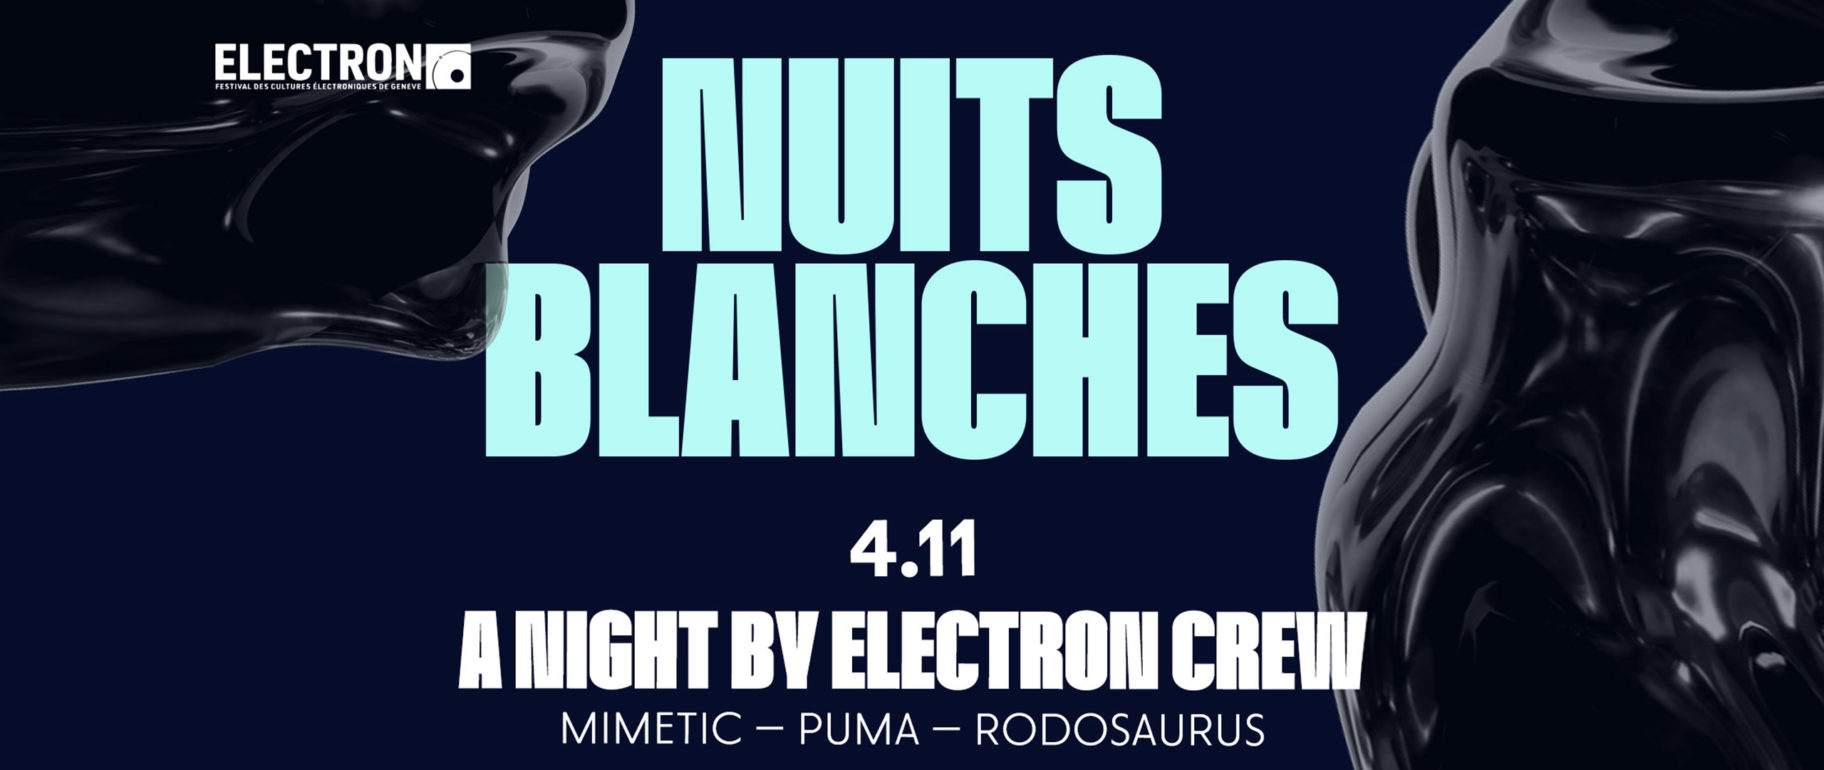 Nuits Blanches - A NIGHT BY ELECTRON CREW - フライヤー表